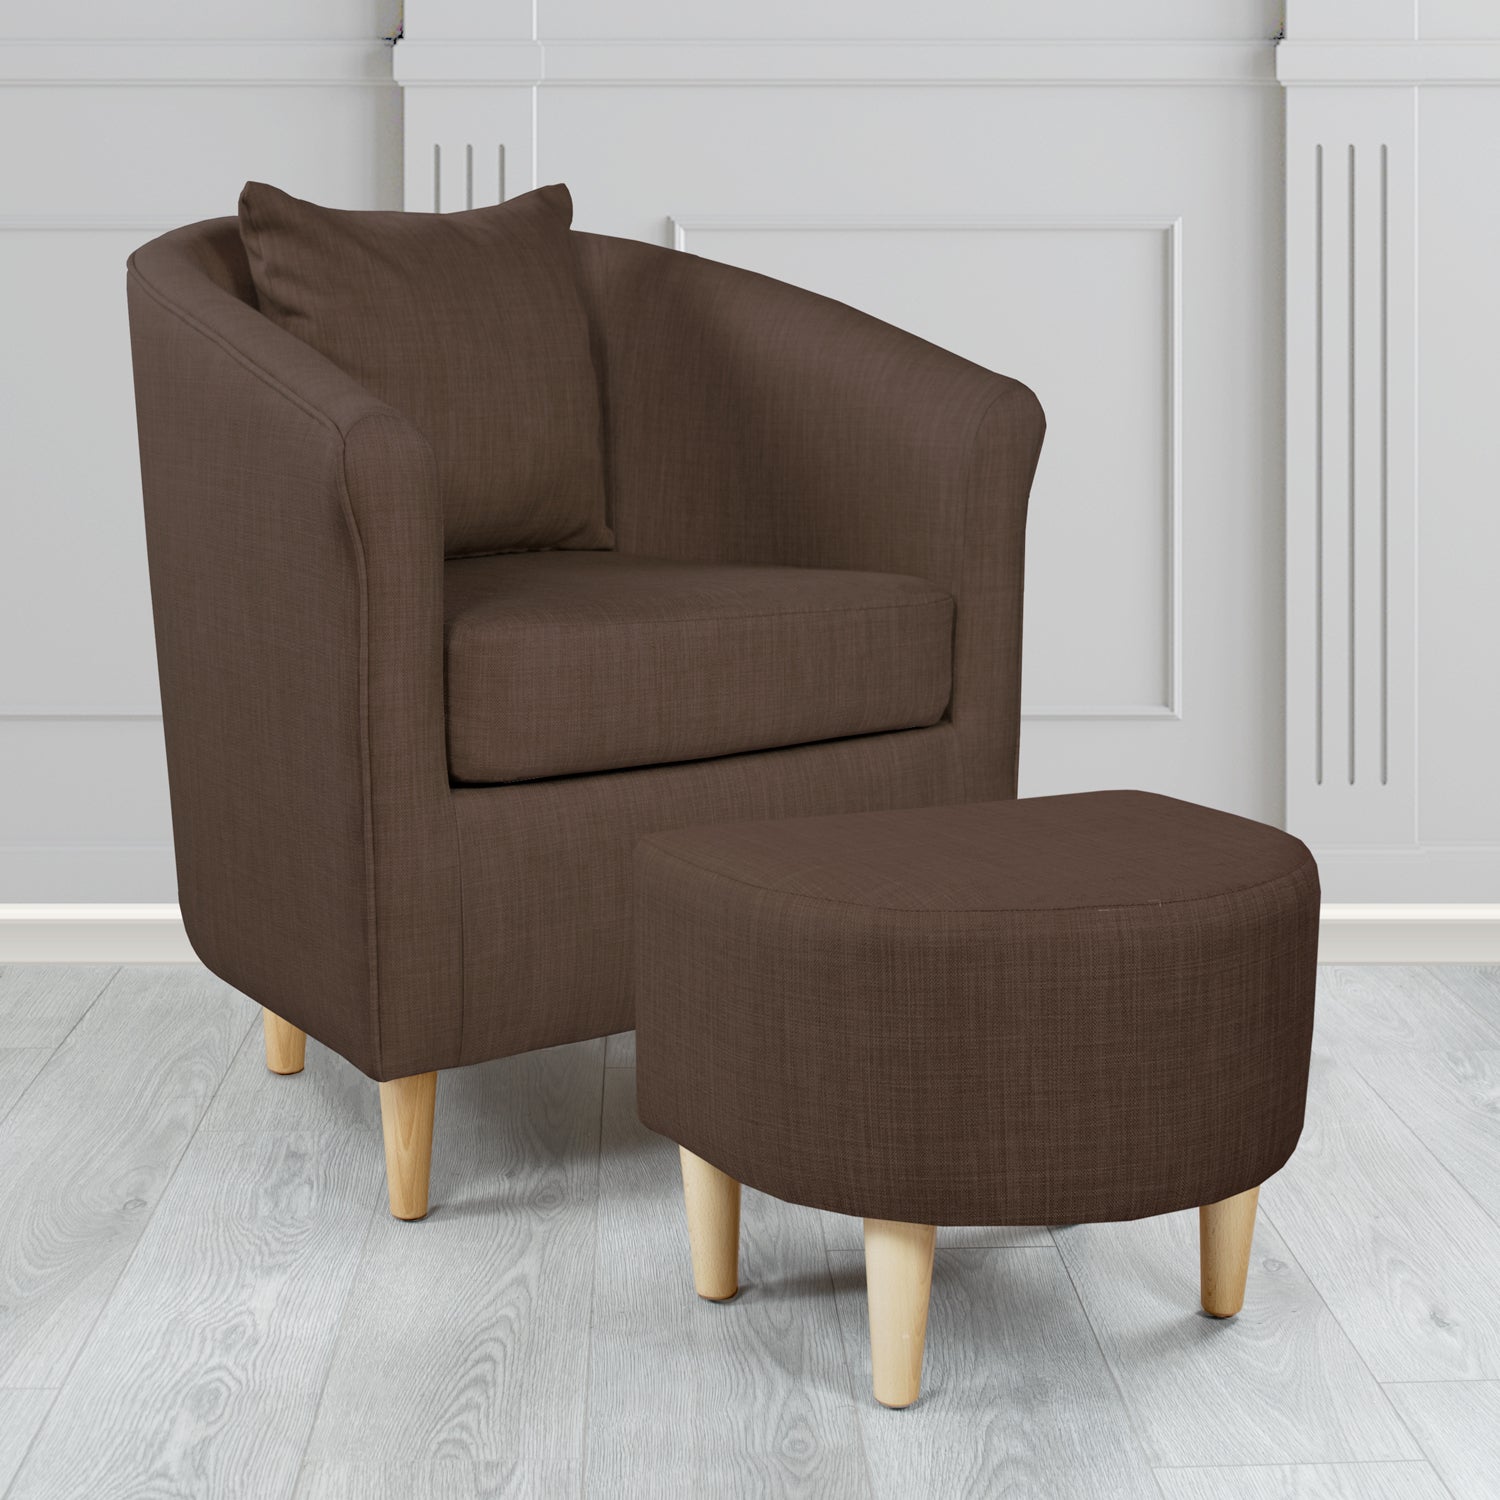 St Tropez Charles Sandalwood Plain Linen Fabric Tub Chair & Footstool Set with Scatter Cushion - The Tub Chair Shop